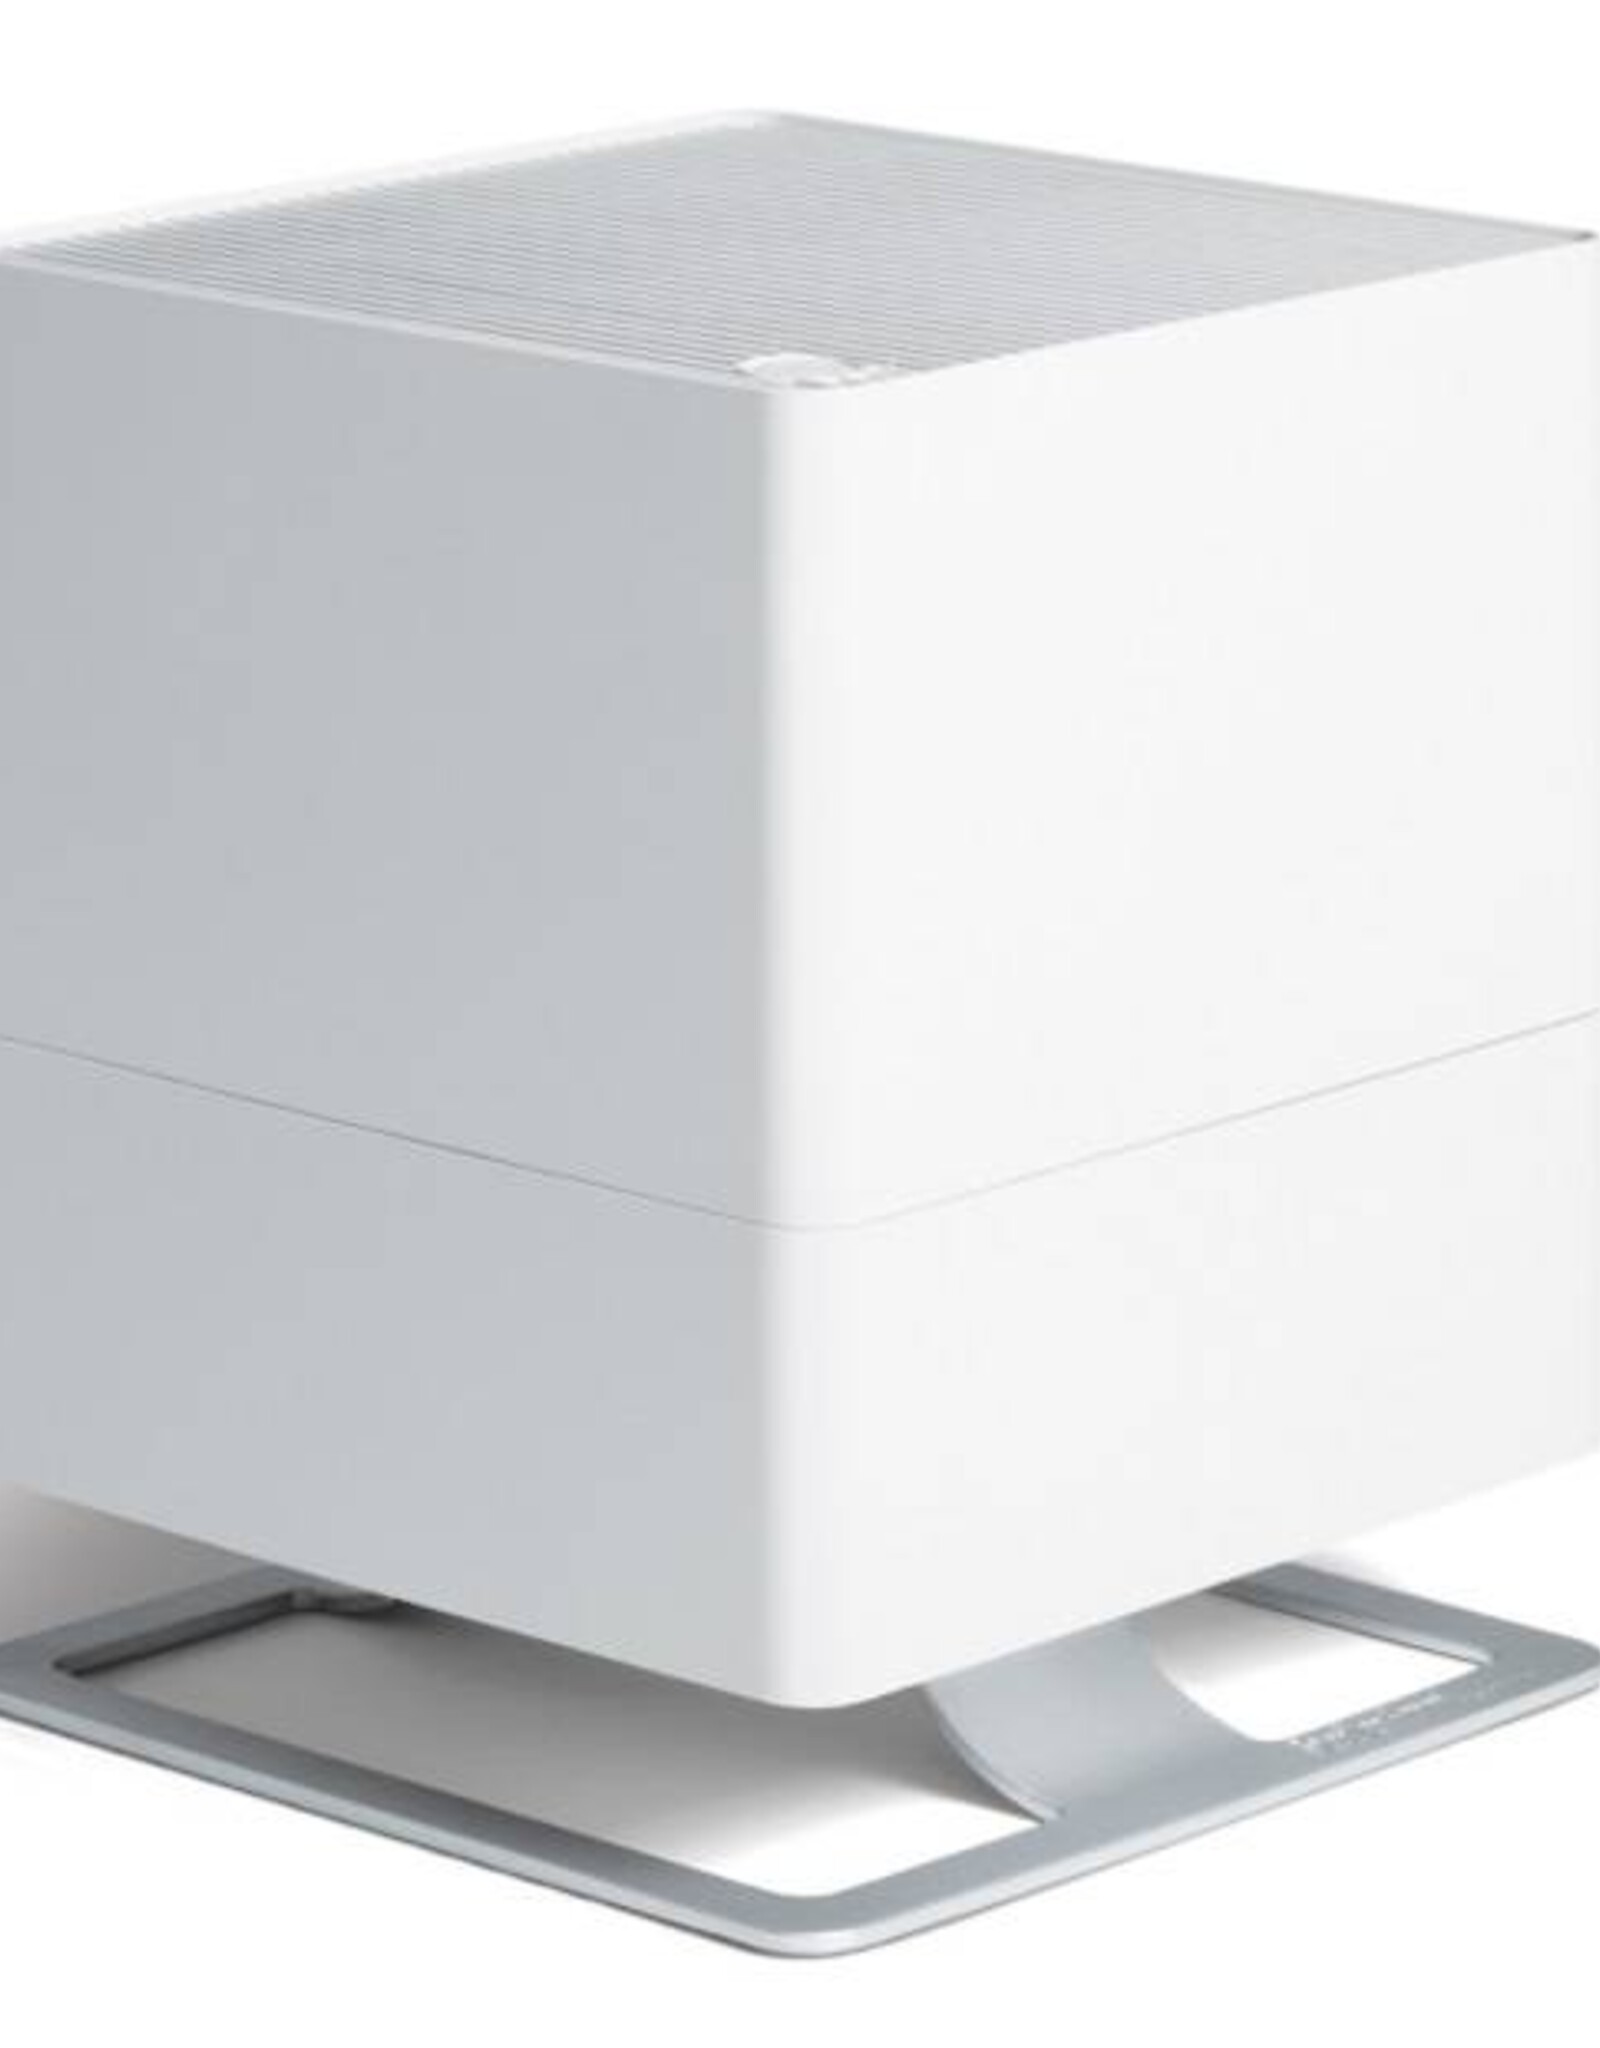 &Klevering Humidifier white